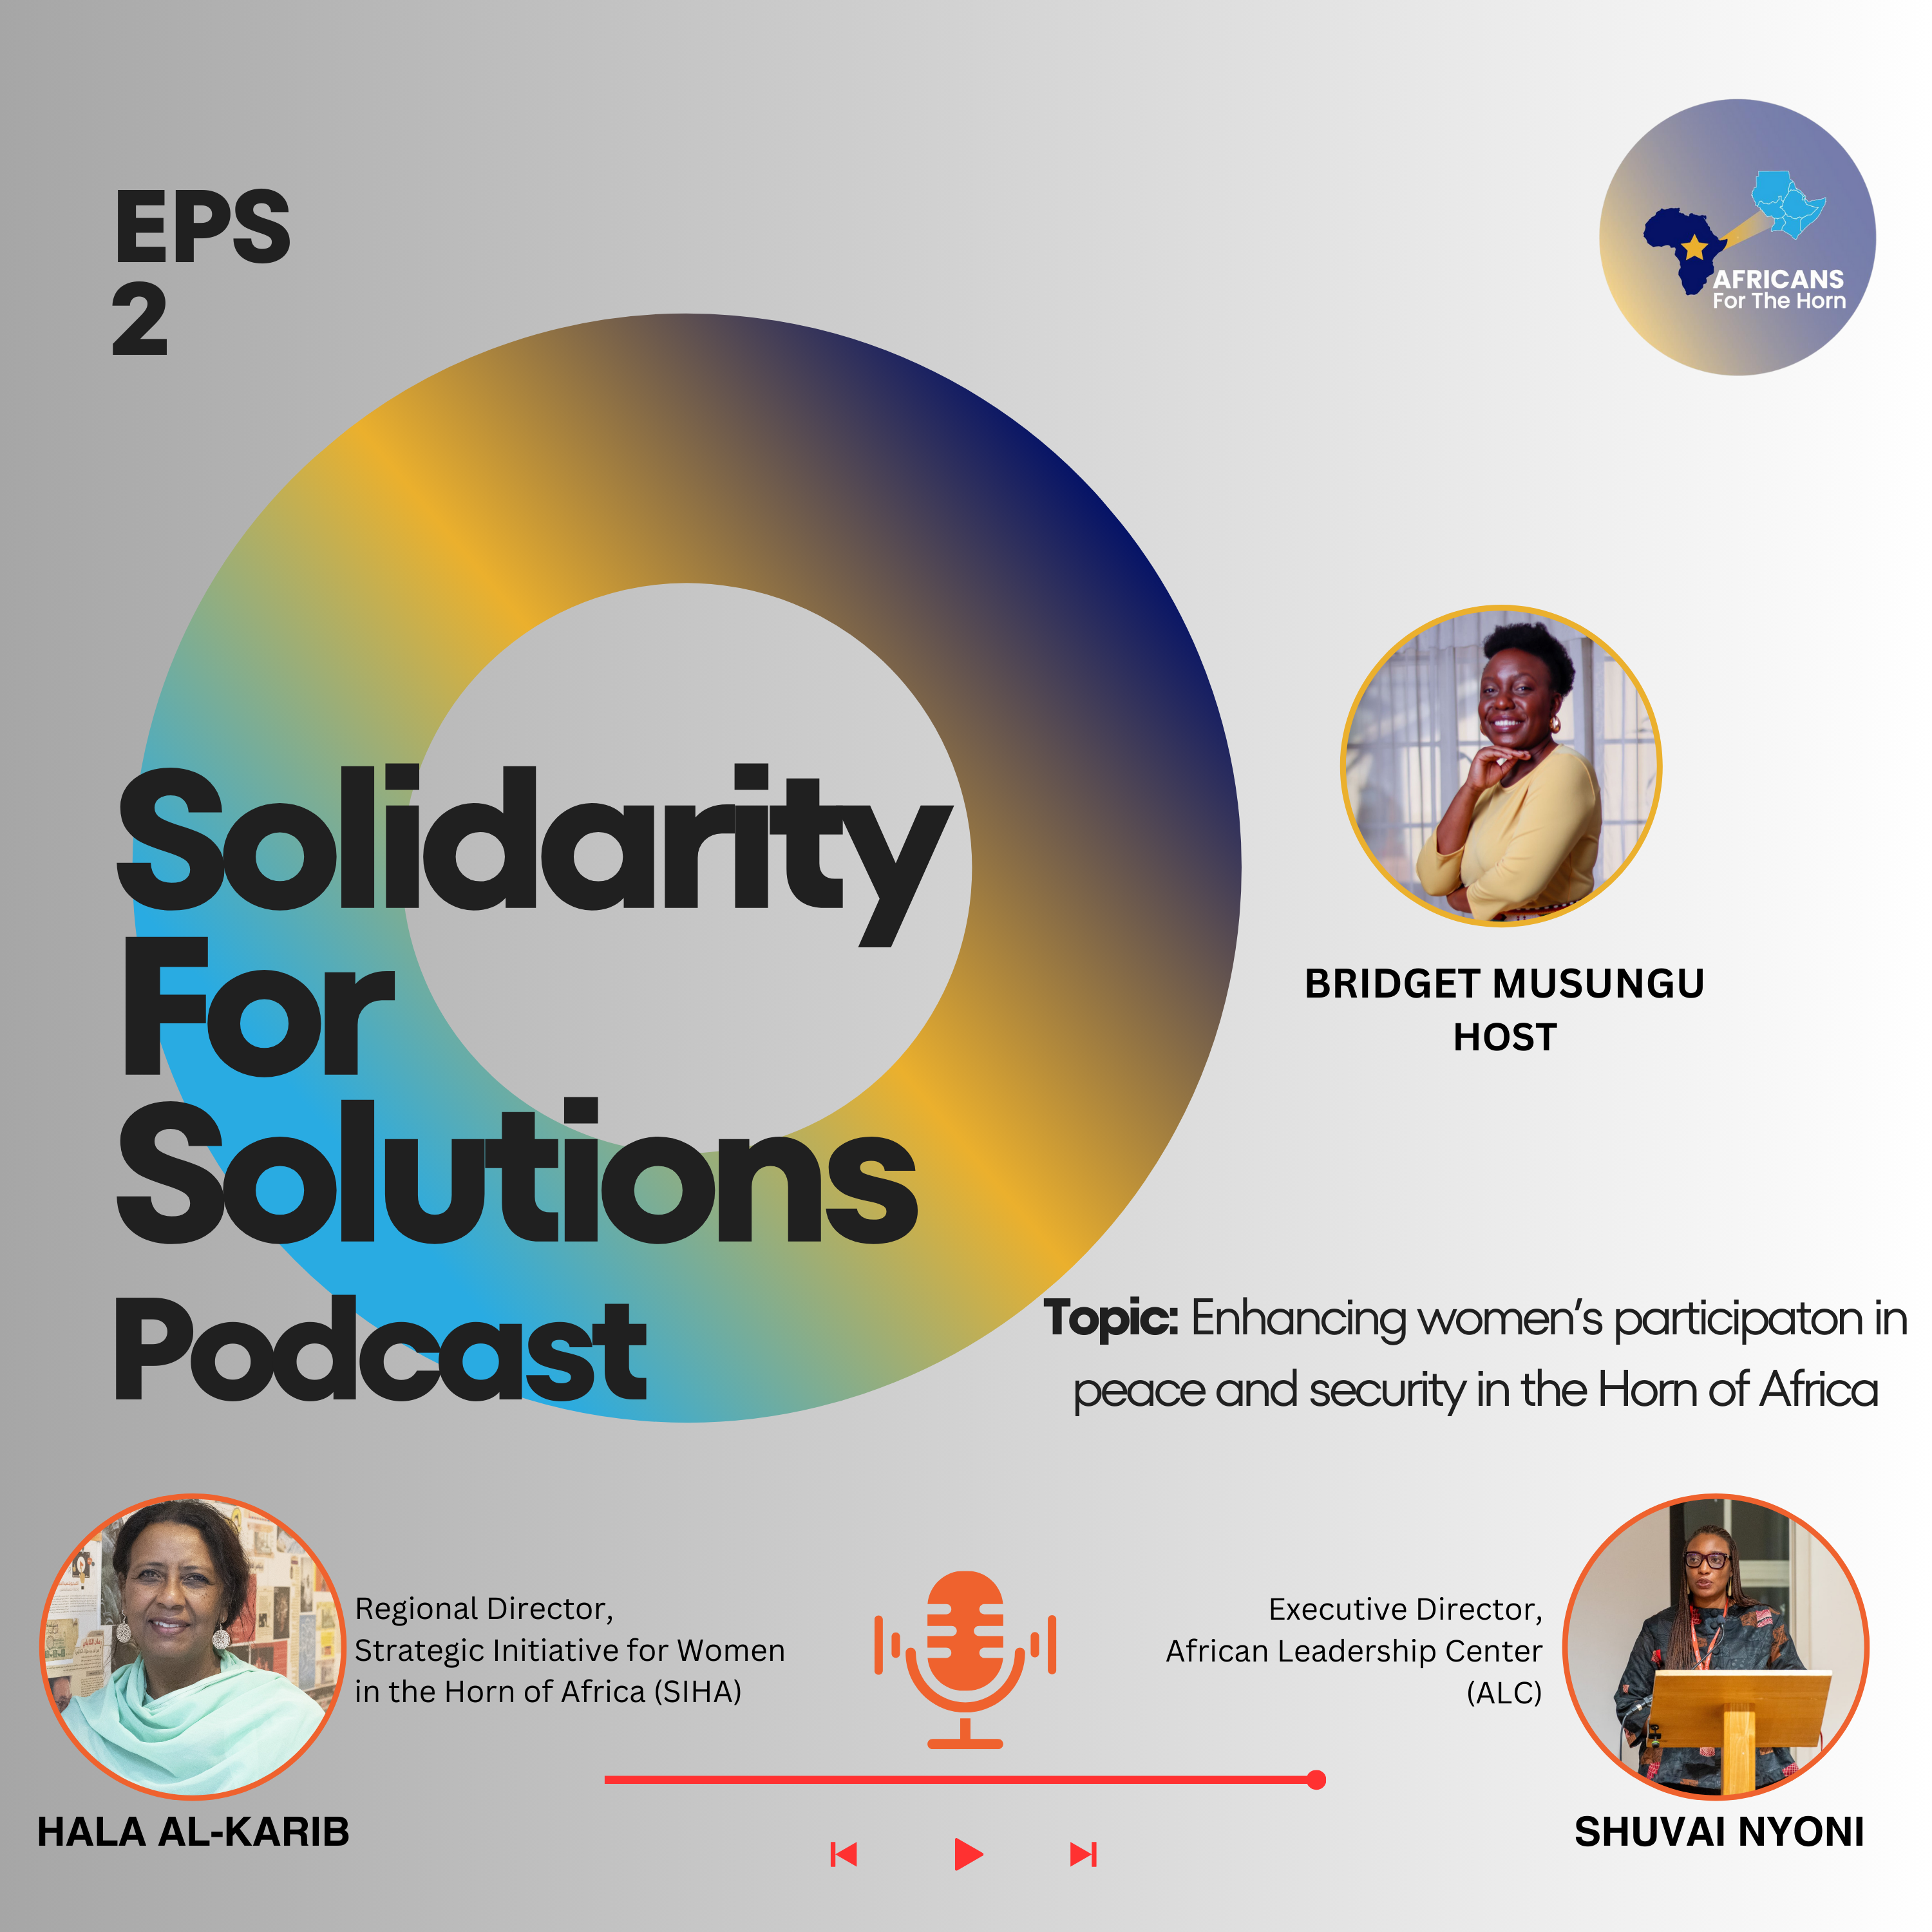 Episode 2 of Solidarity For Solutions